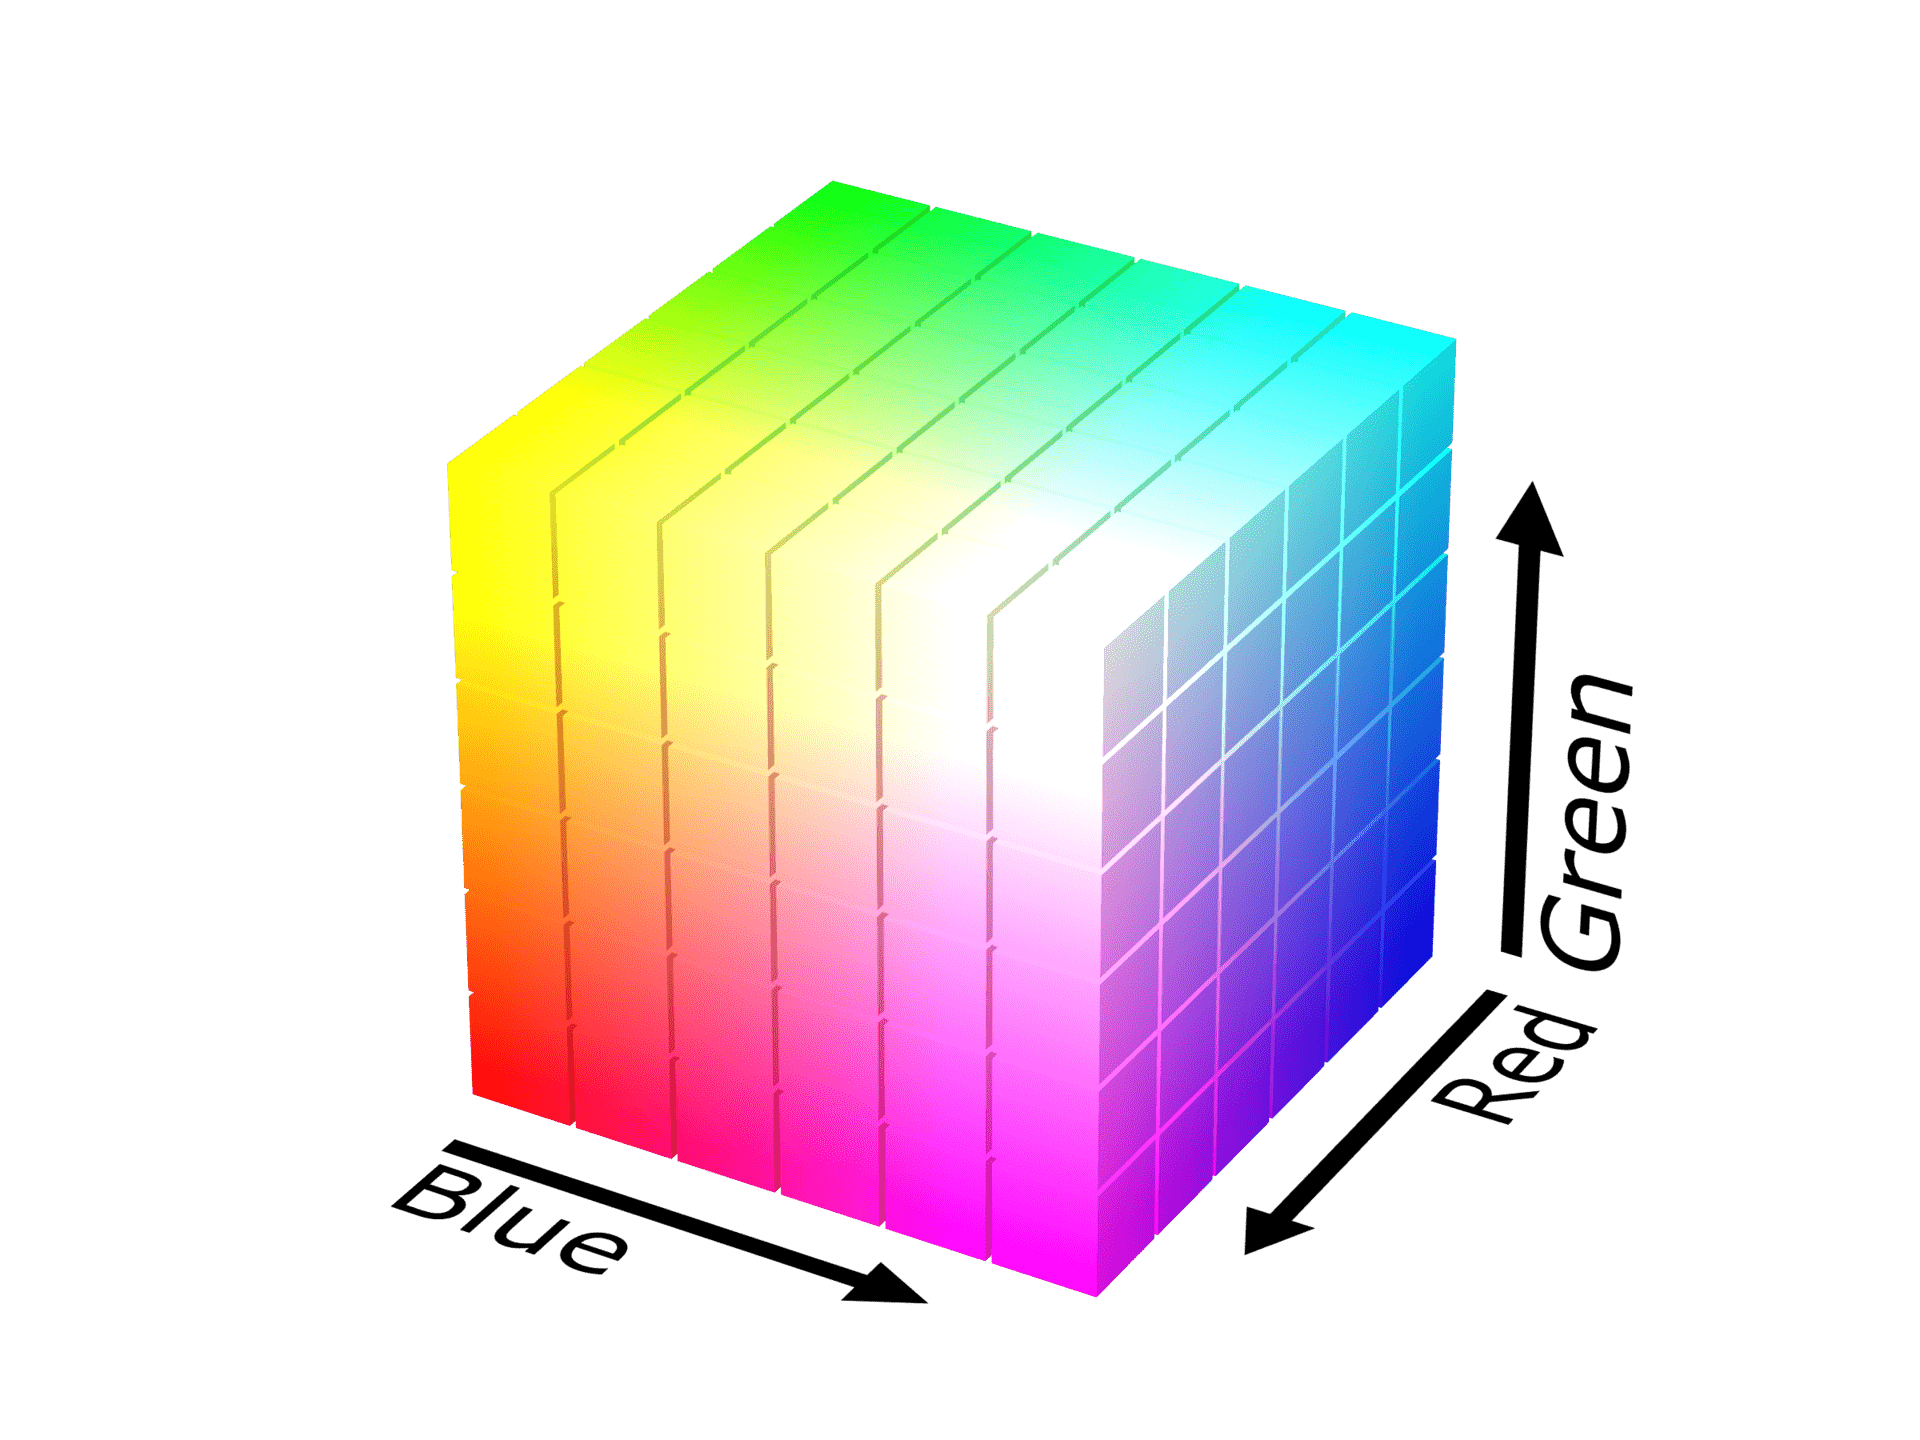 The RGB color model as a cube with red, blue, and green axes